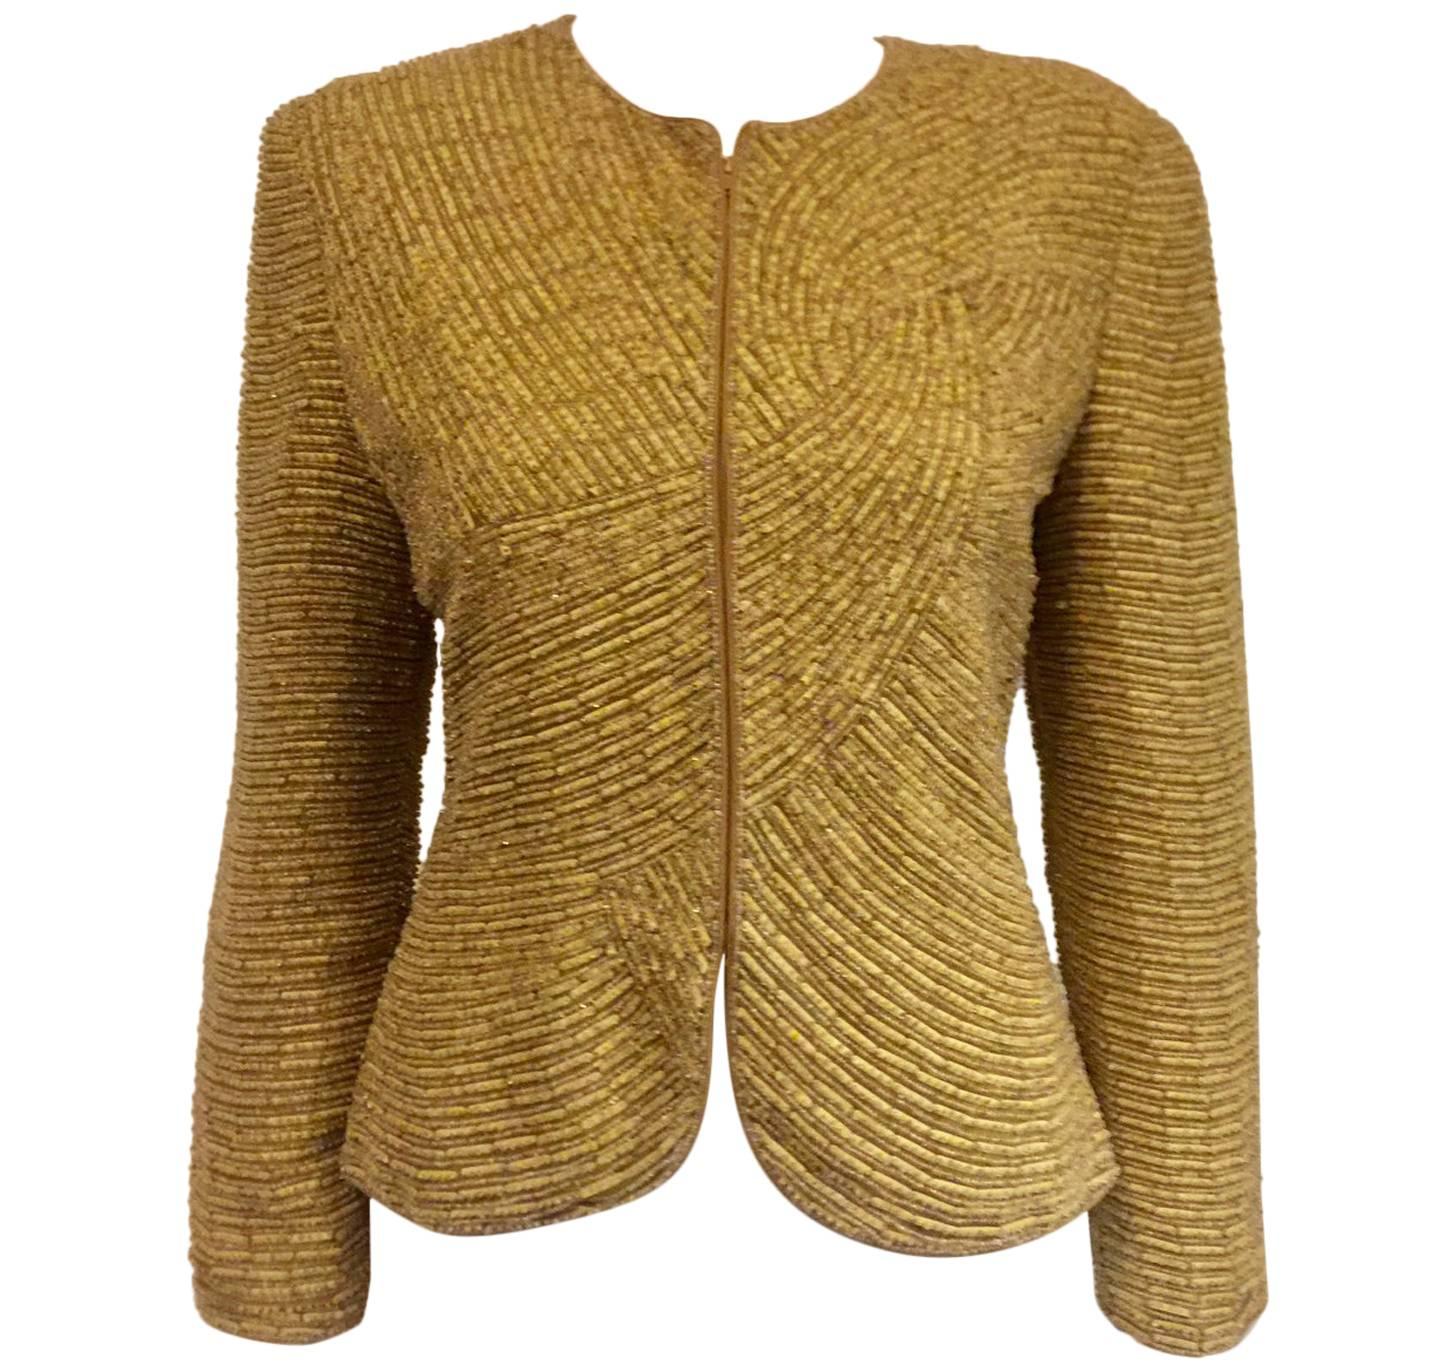 Magnificent Mary McFadden Couture Vintage Beige/Mustard Beaded Jacket For Sale